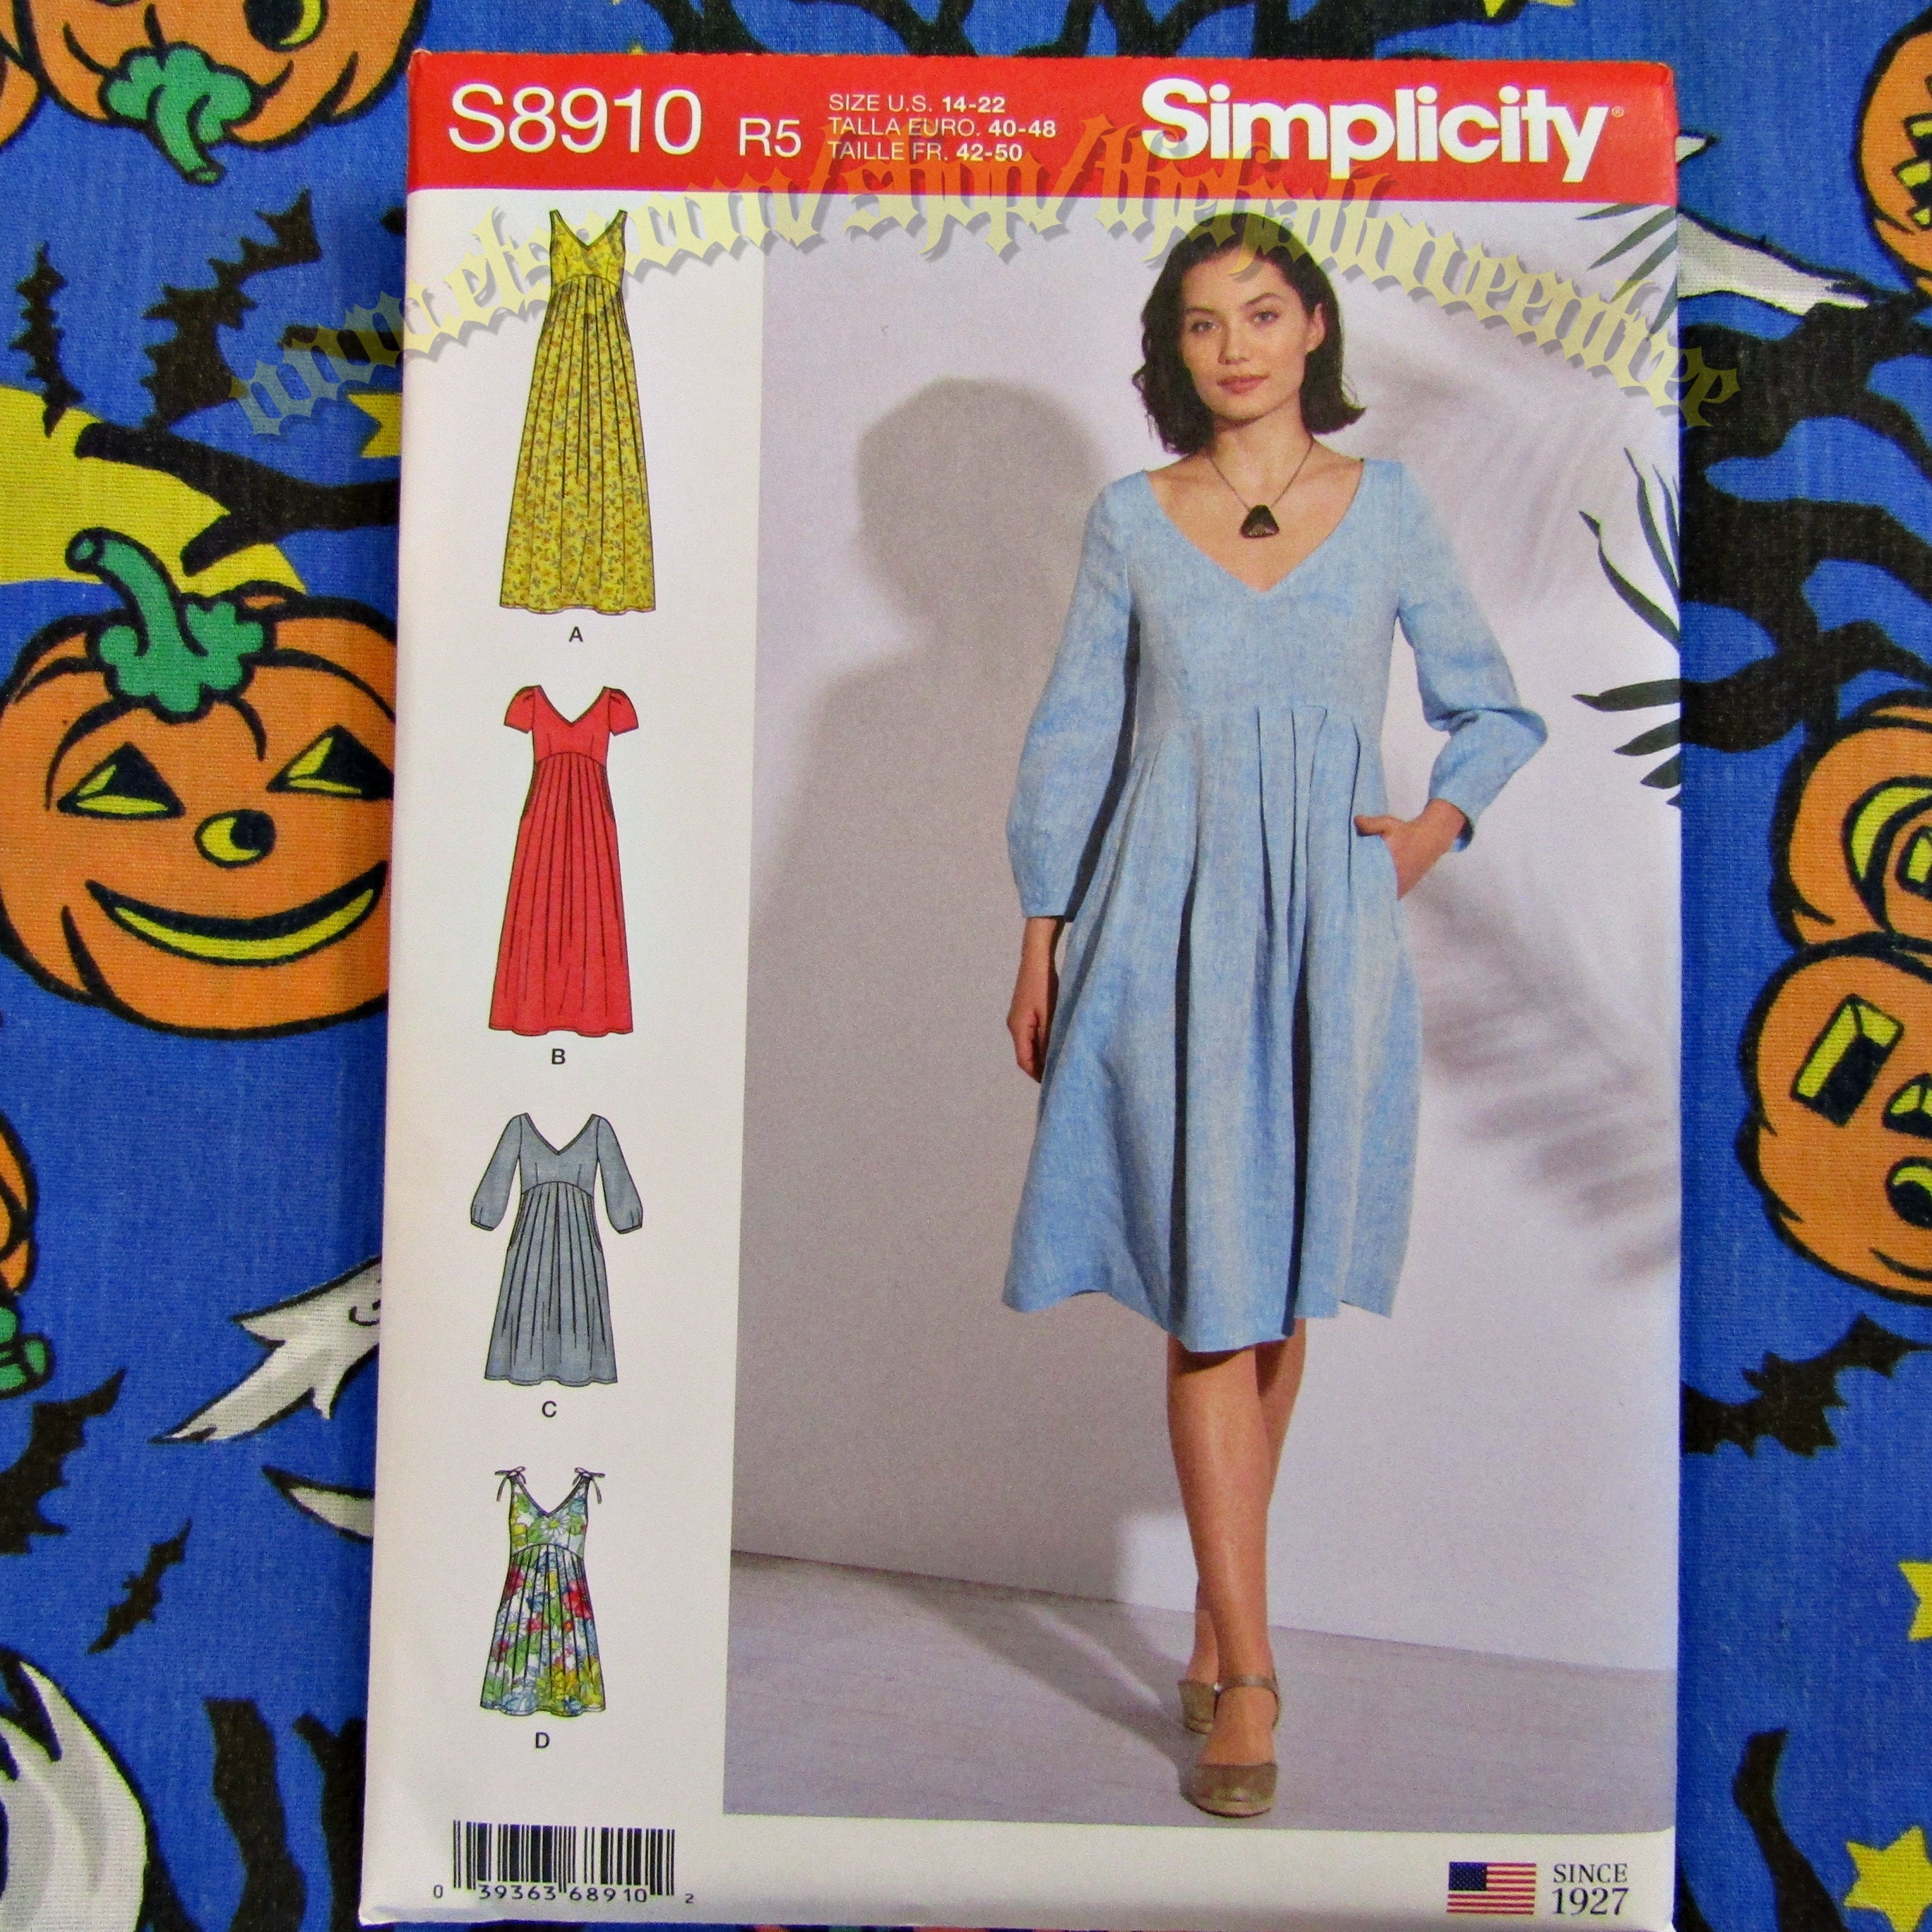 S8910, Simplicity Sewing Pattern Misses' Dress